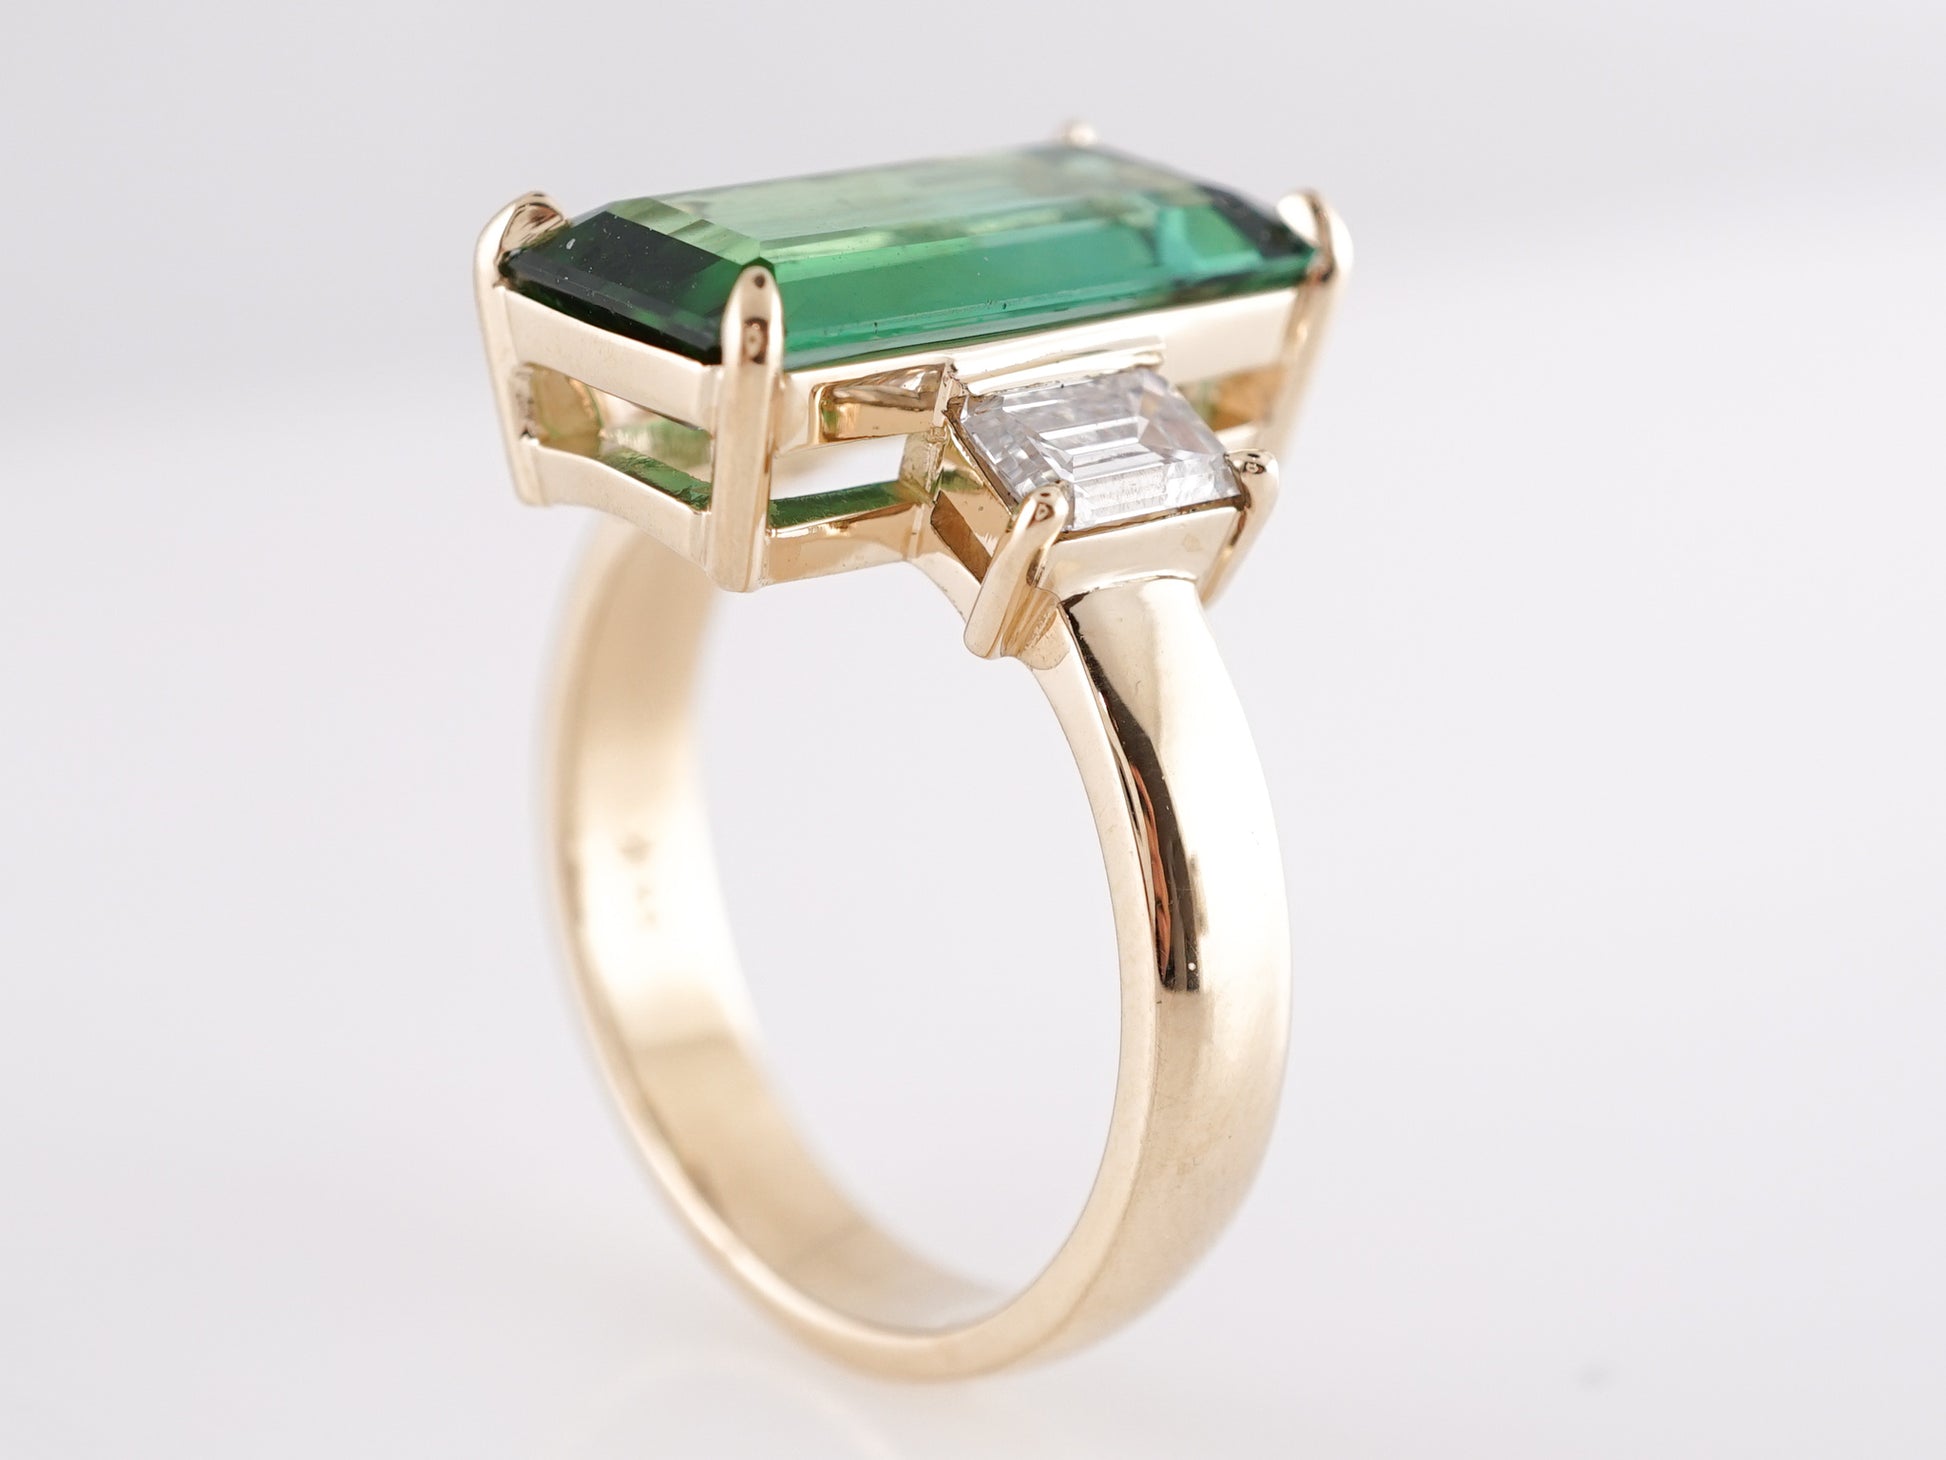 4.12 Tourmaline Engagement Ring in 14k Yellow GoldComposition: Platinum Ring Size: 6.25 Total Diamond Weight: .70ct Total Gram Weight: 5.5 g Inscription: 14k
      